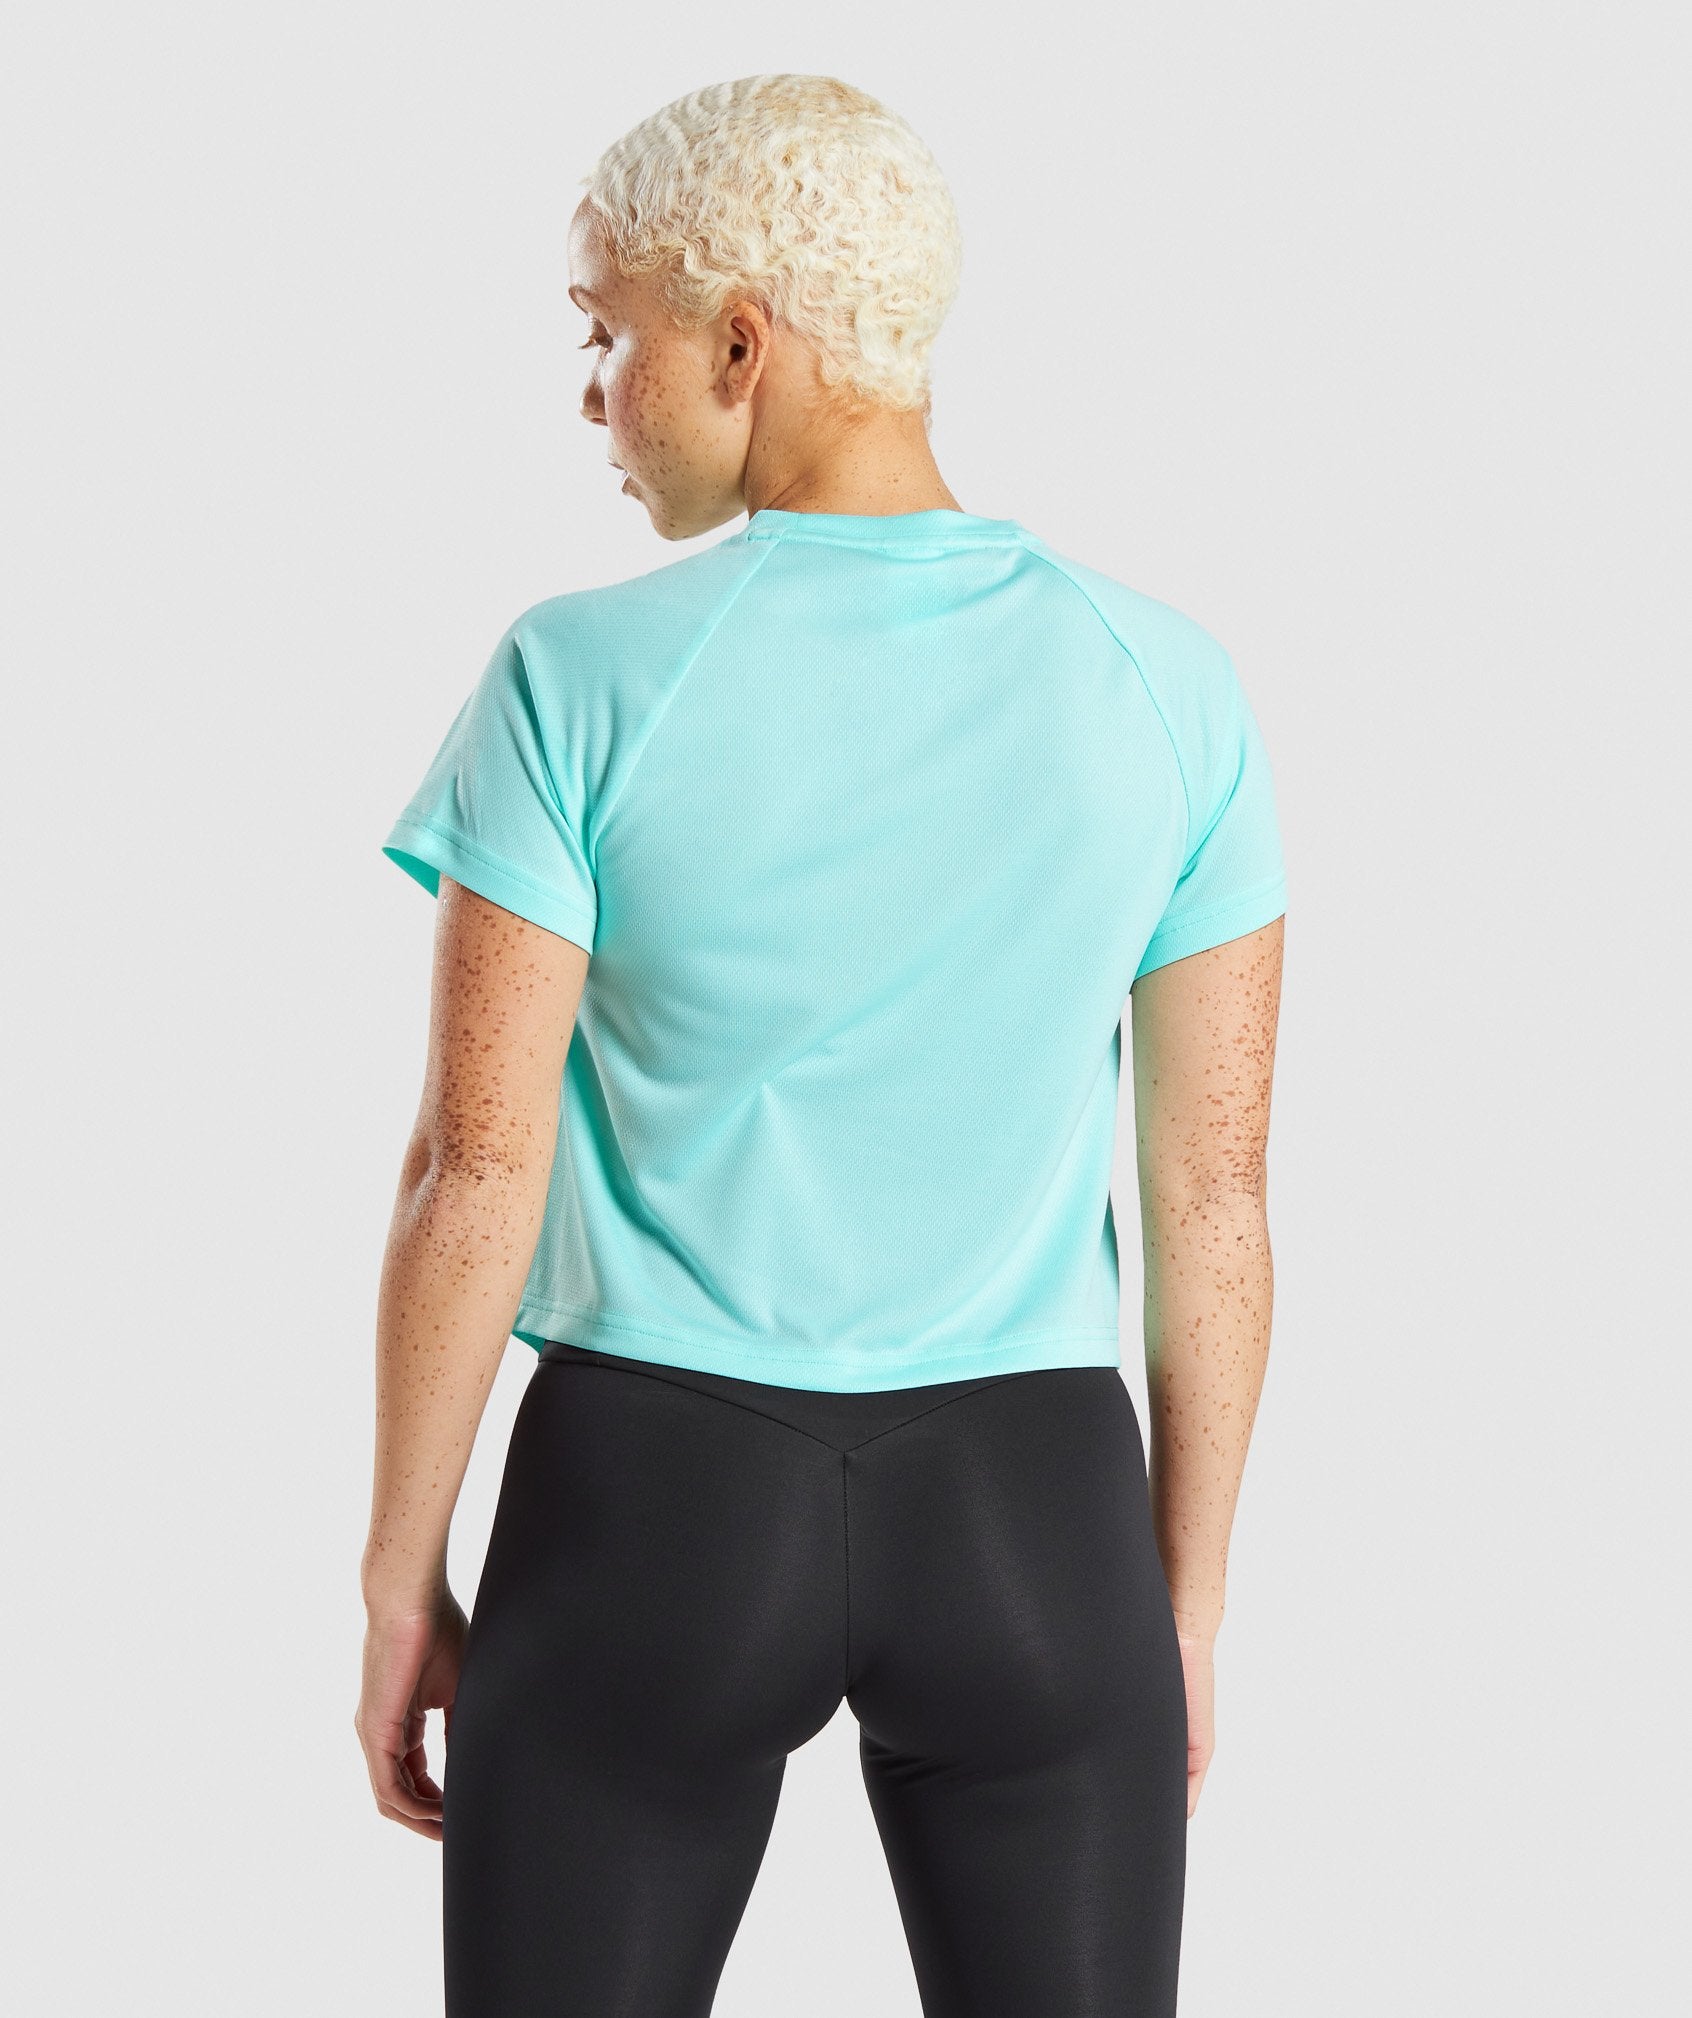 Speed Graphic T-Shirt in Turquoise - view 3